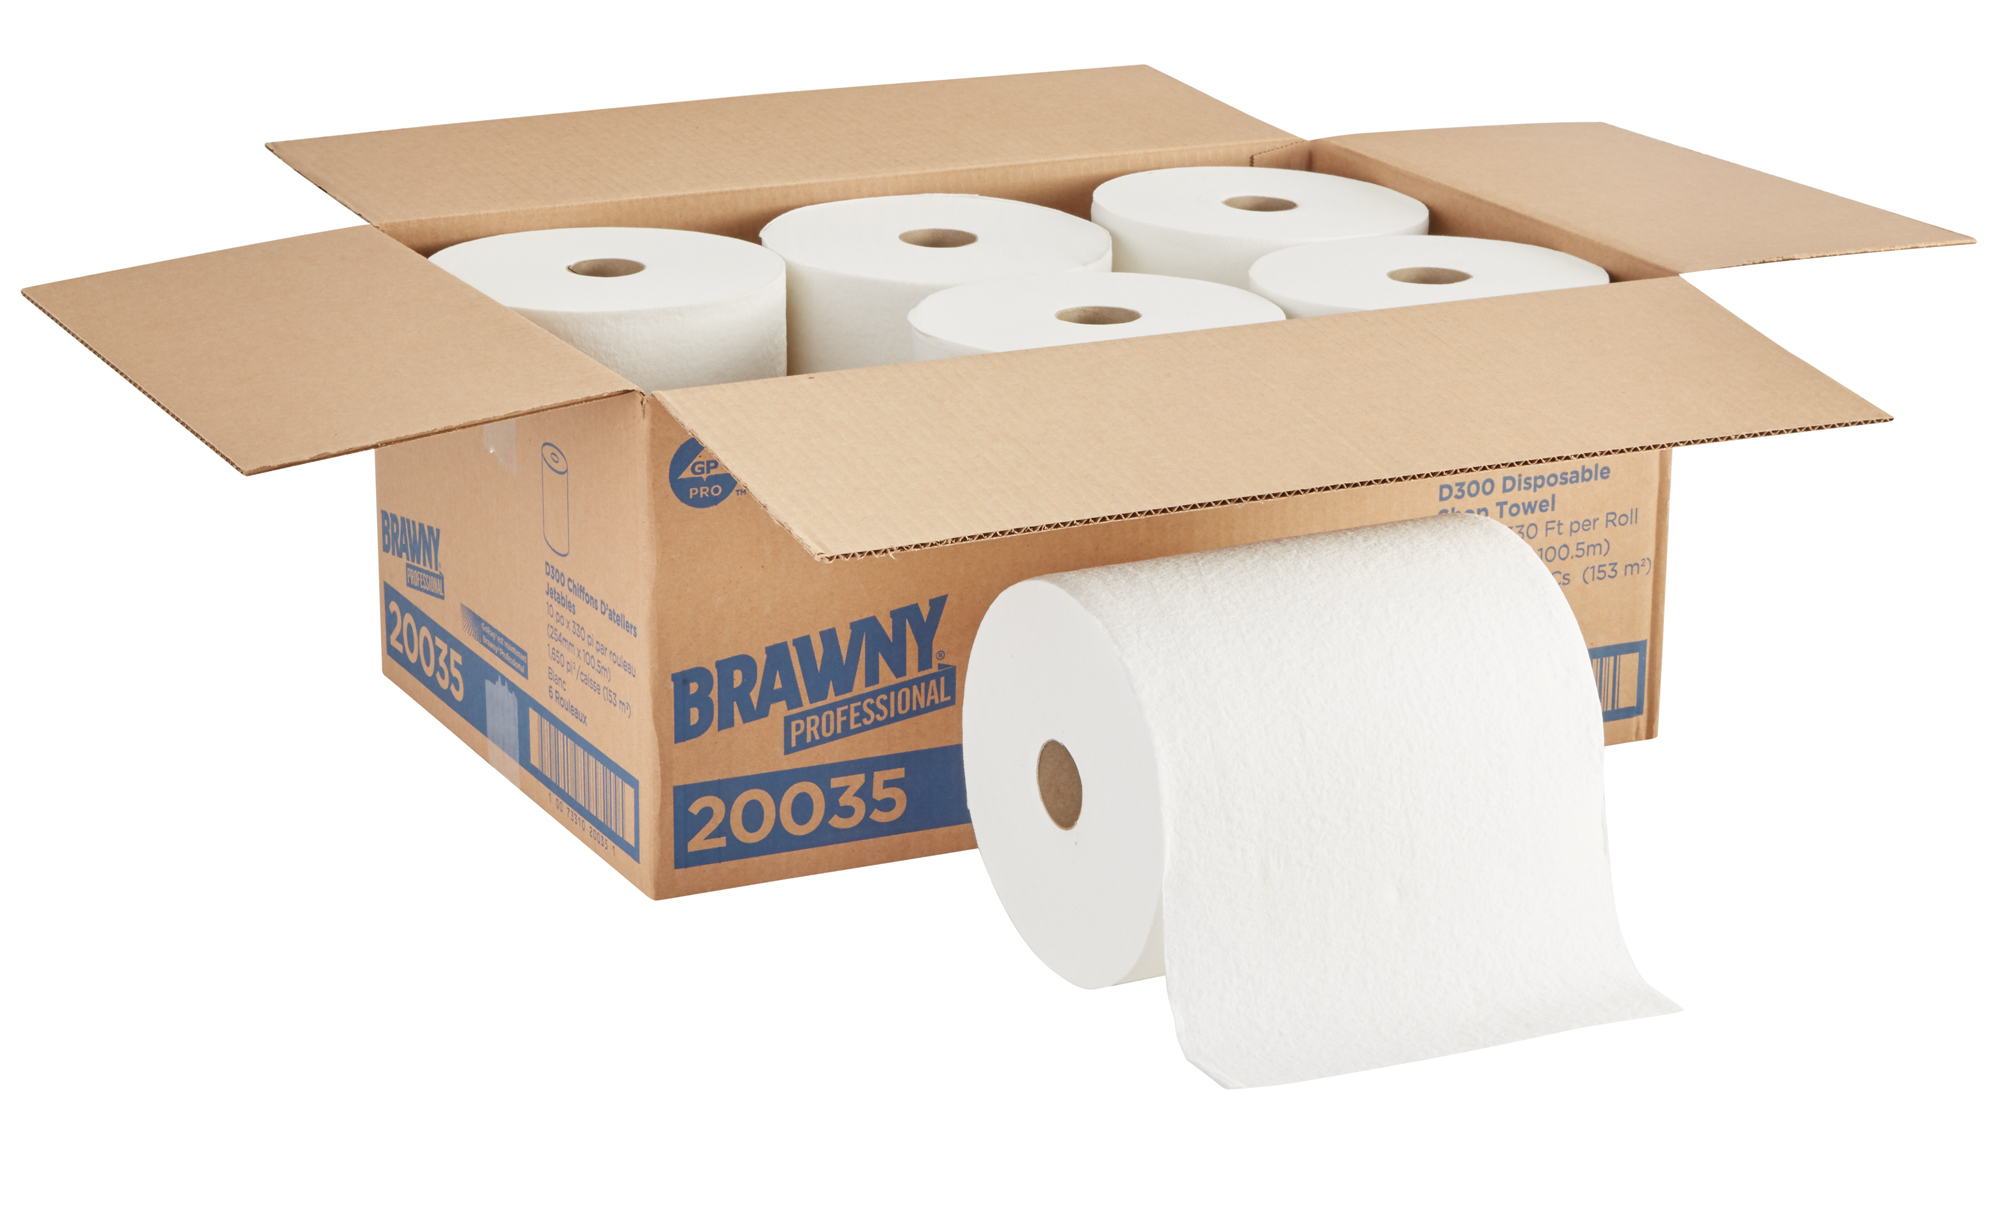 GP PRO Brawny® Professional D300 Disposable Shop Towel, Refill Roll, White